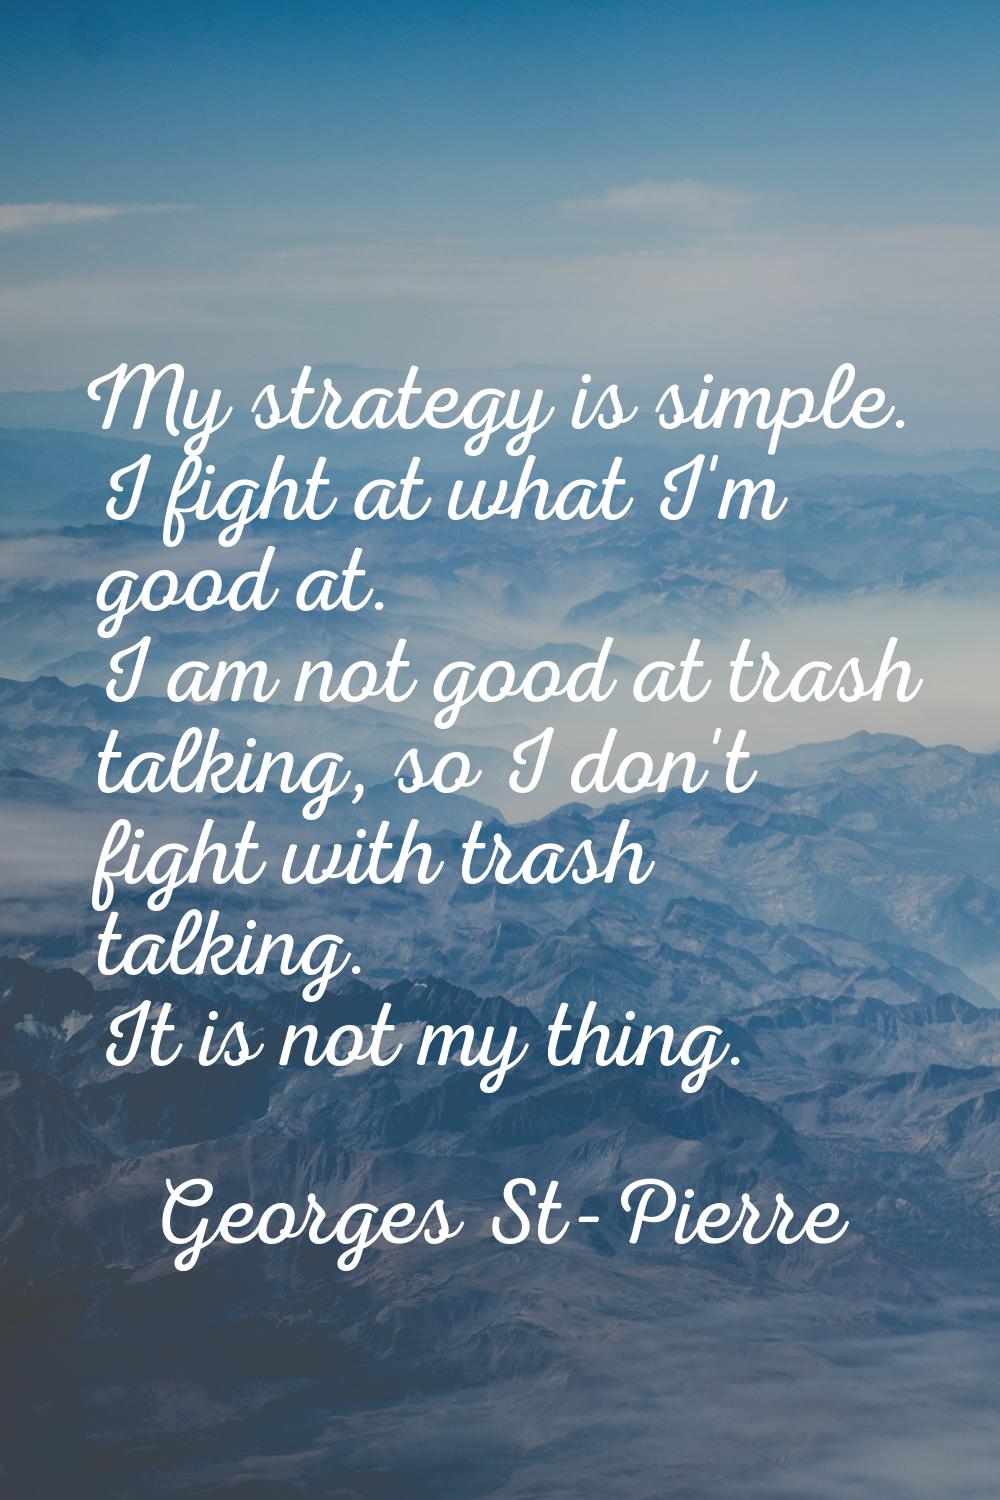 My strategy is simple. I fight at what I'm good at. I am not good at trash talking, so I don't figh